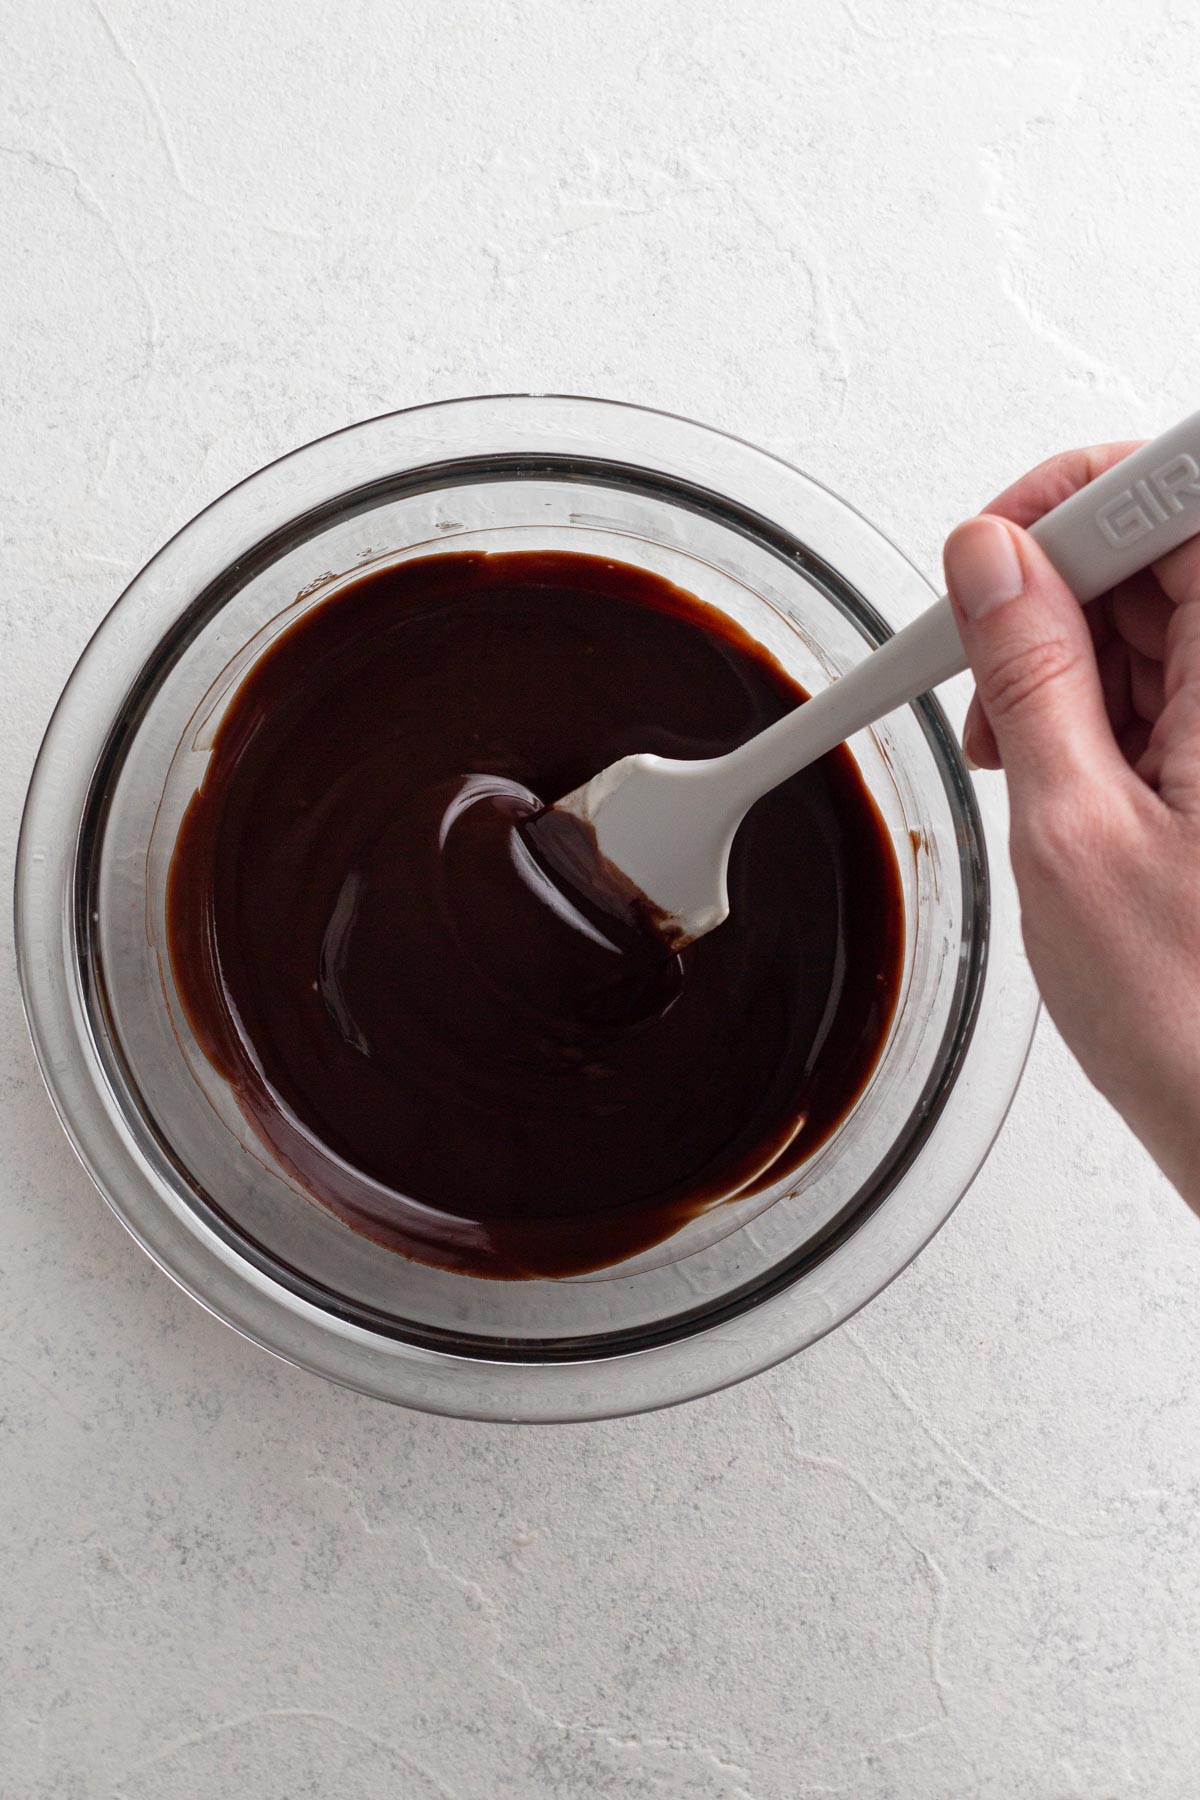 Hand stirring chocolate ganache in a glass mixing bowl using a rubber spatula.